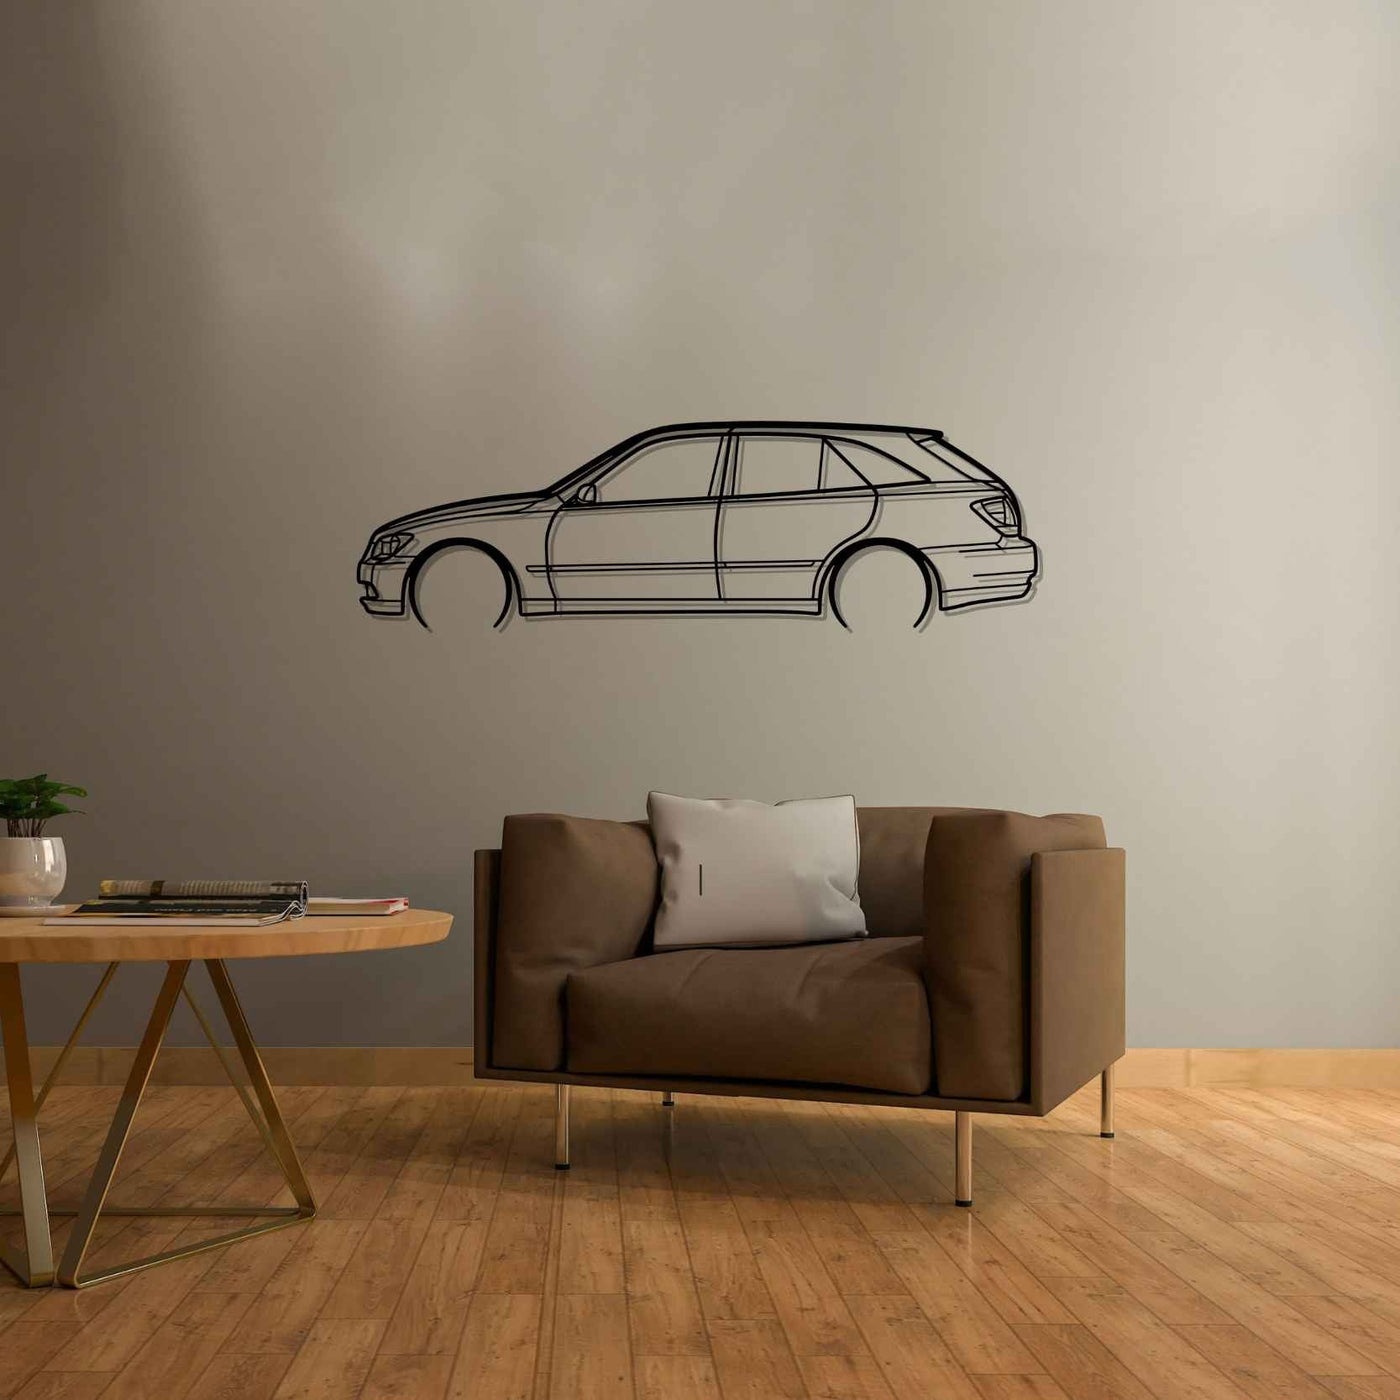 IS300 2002 Wagon Detailed Silhouette Metal Wall Art